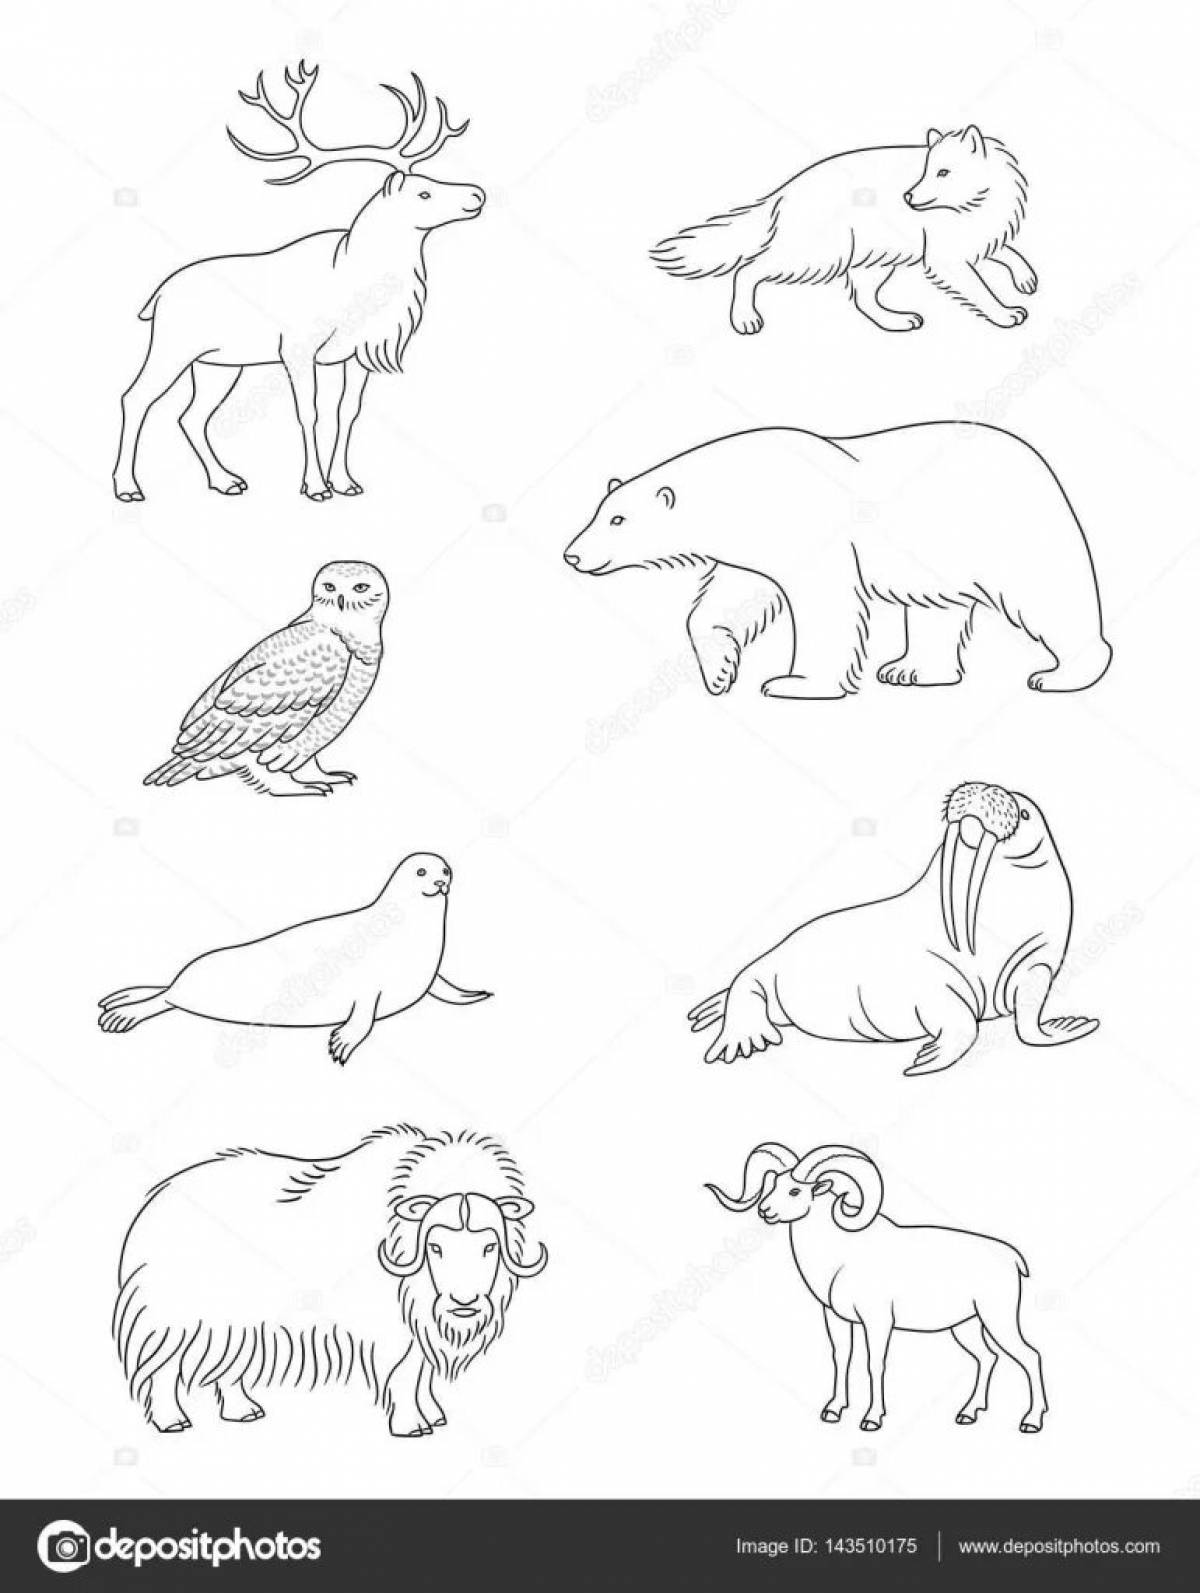 Animated coloring book of northern animals for kindergarten